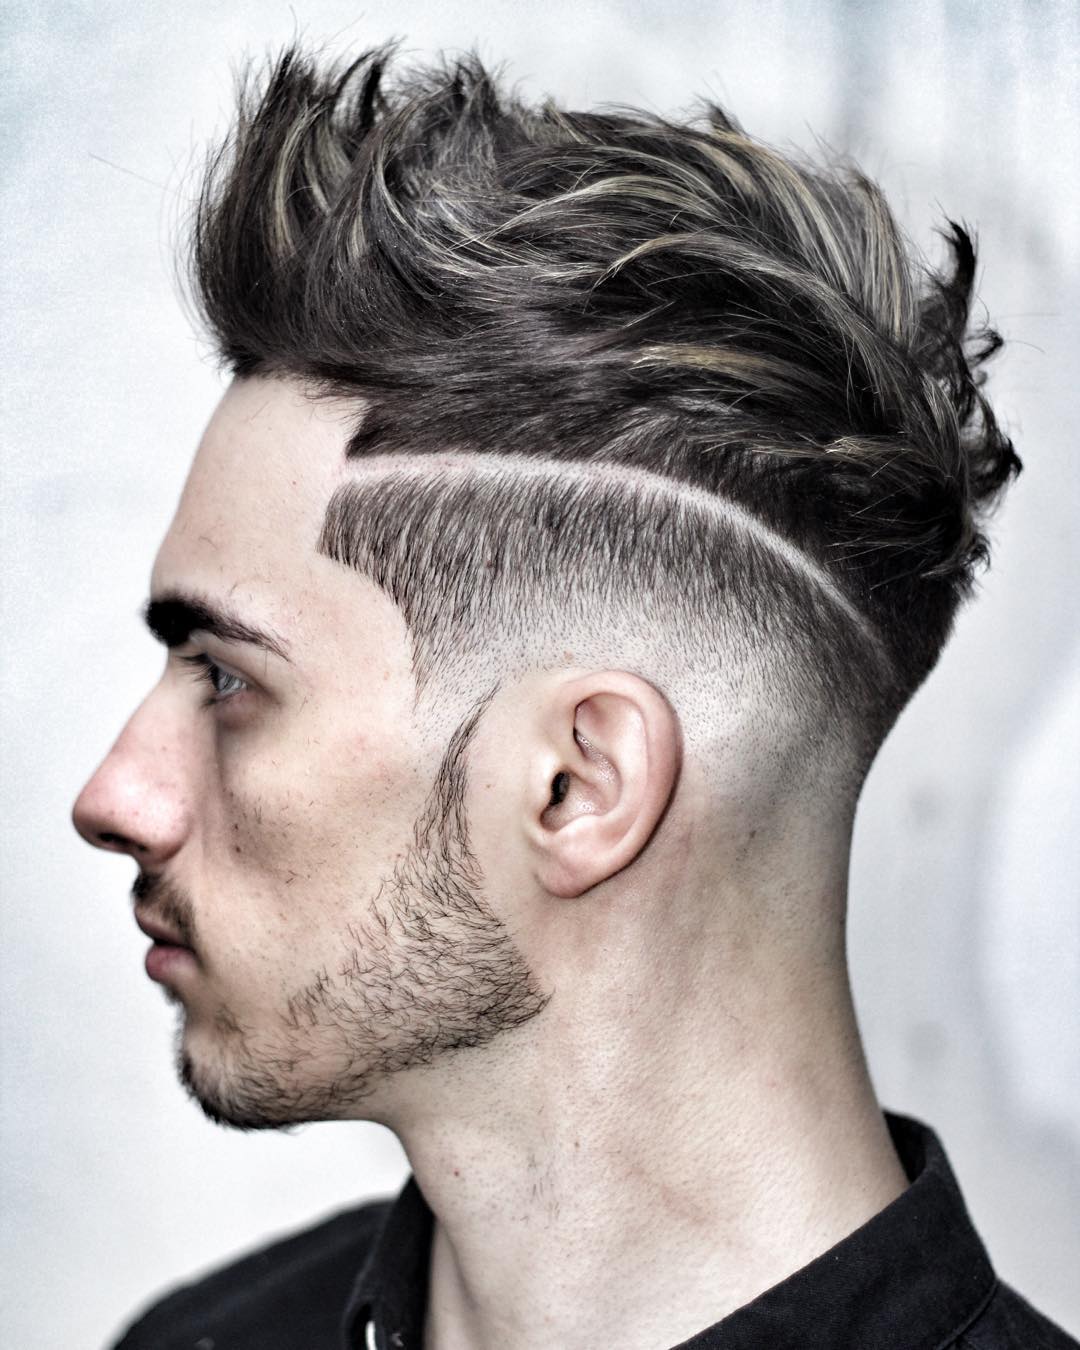 ryancullenhair_and hi lo fade textured quiff best haircut for men